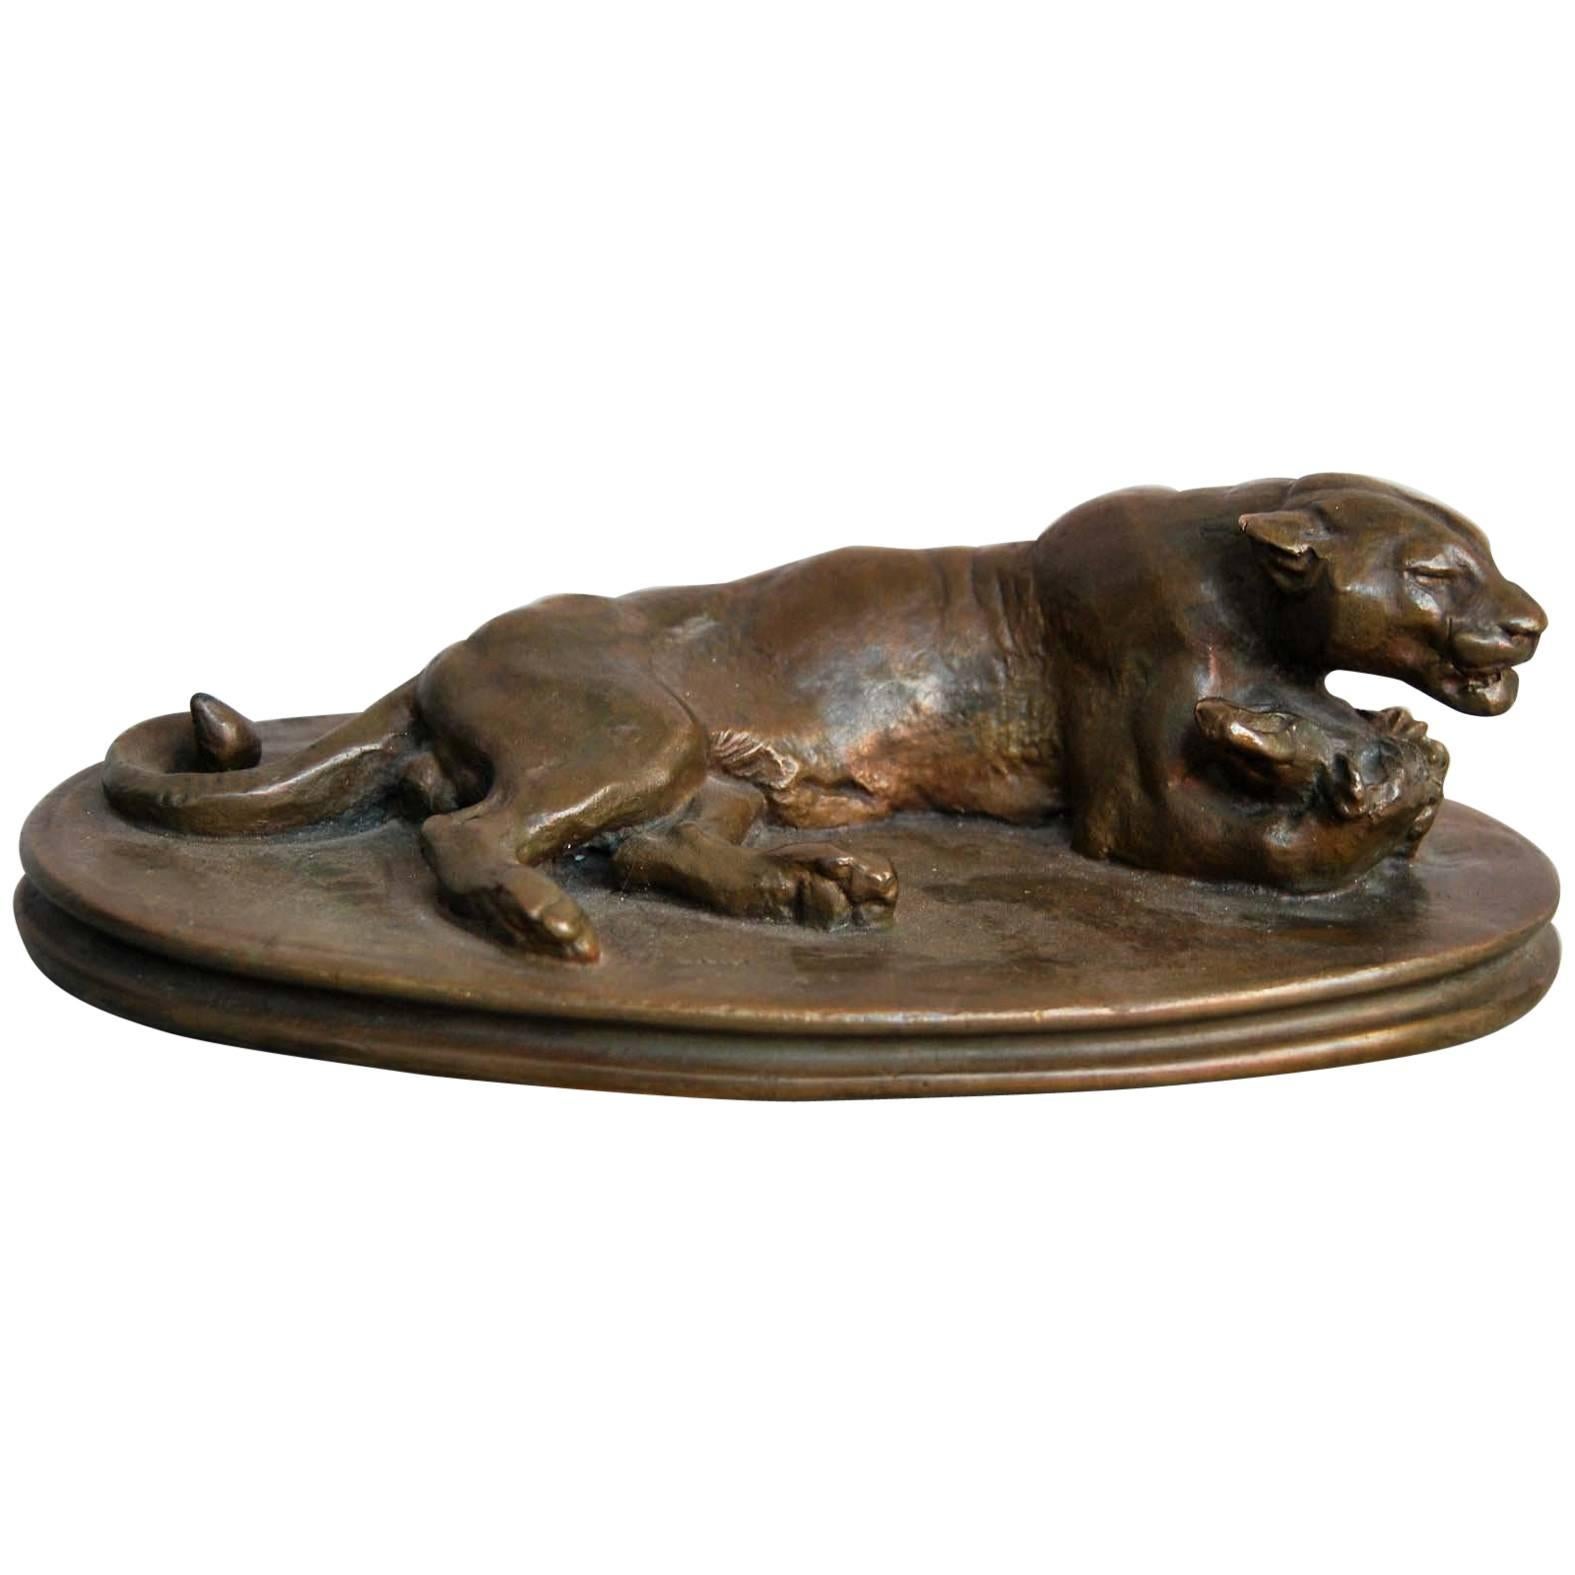 Bronze Sculpture of a Panther by French Sculptor Barye, 19th Century